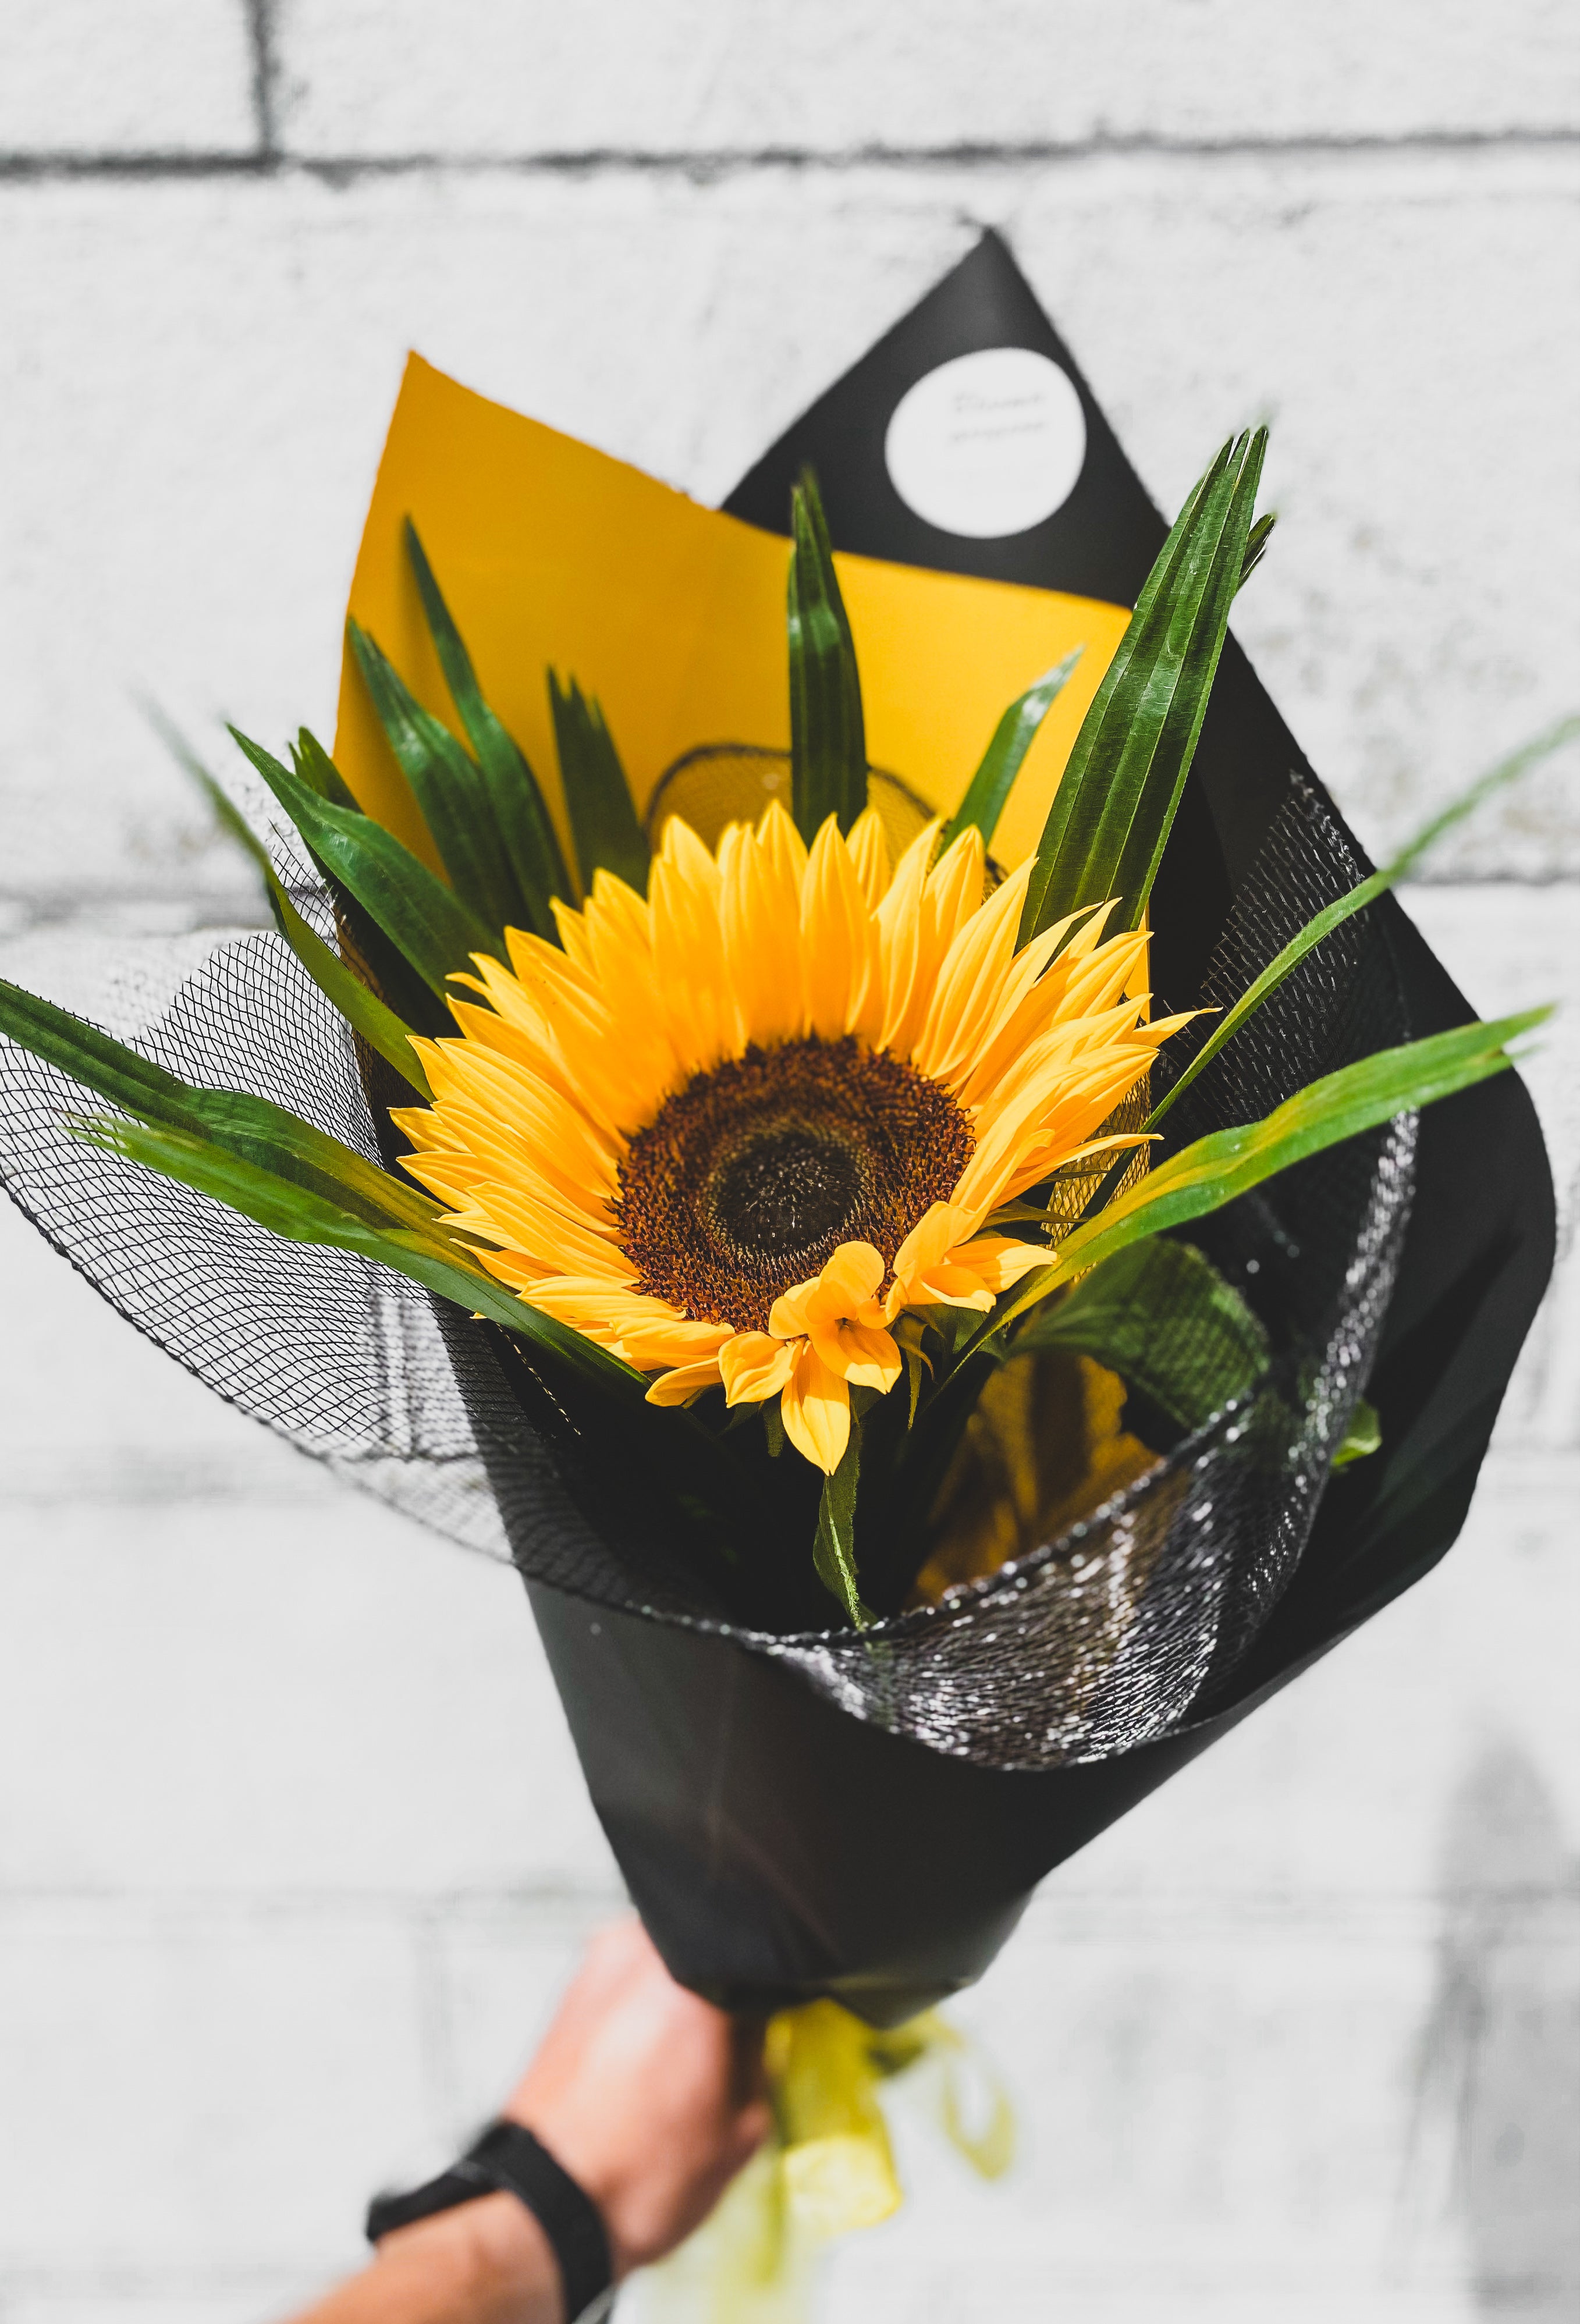 Single wrapped sunflower